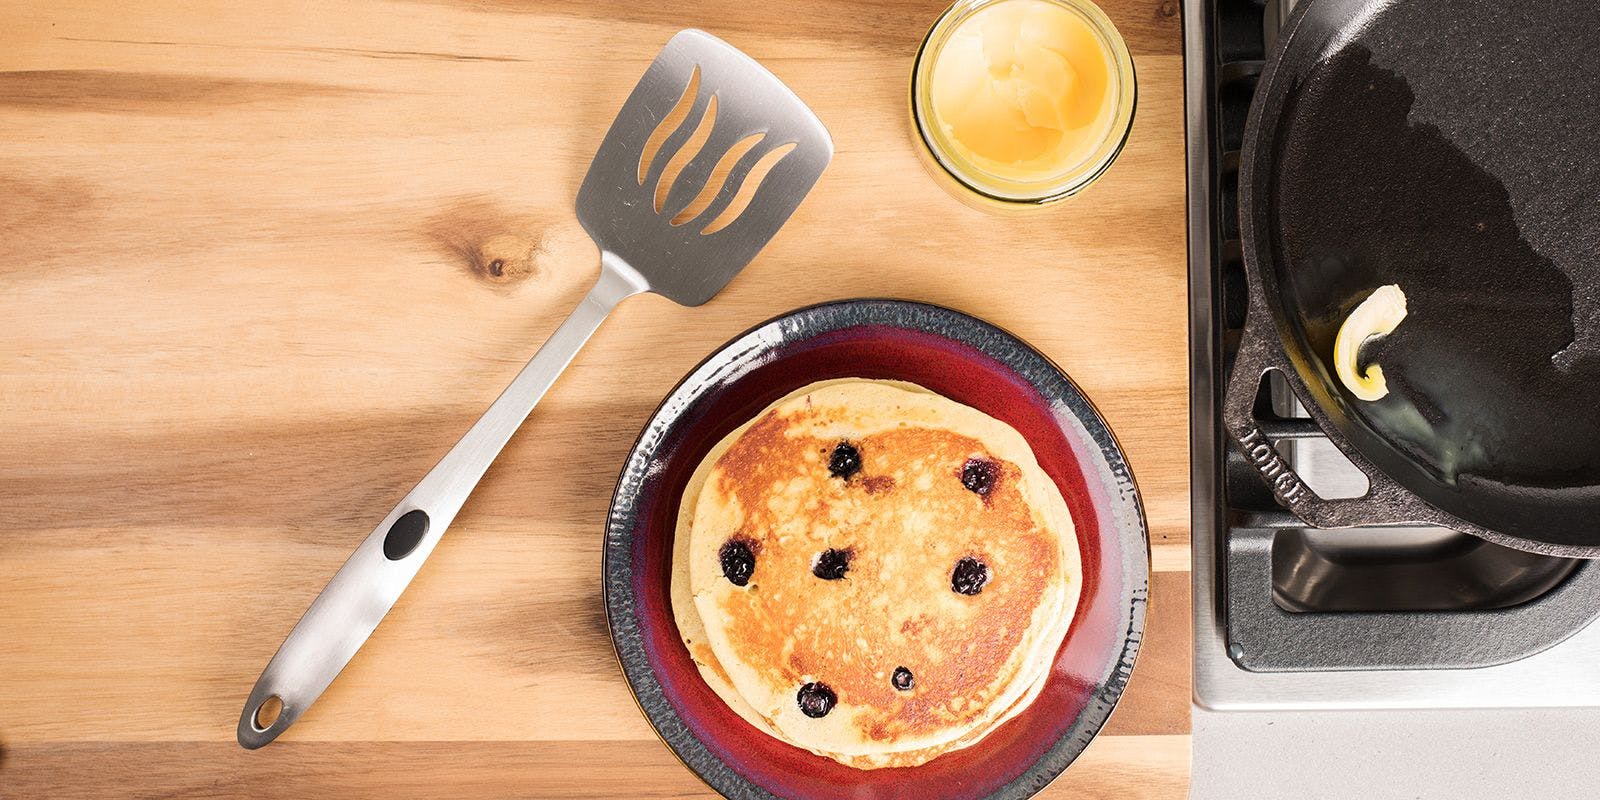 Fresh pancakes sit on a plate next to a jar of ghee and cooking spatula.